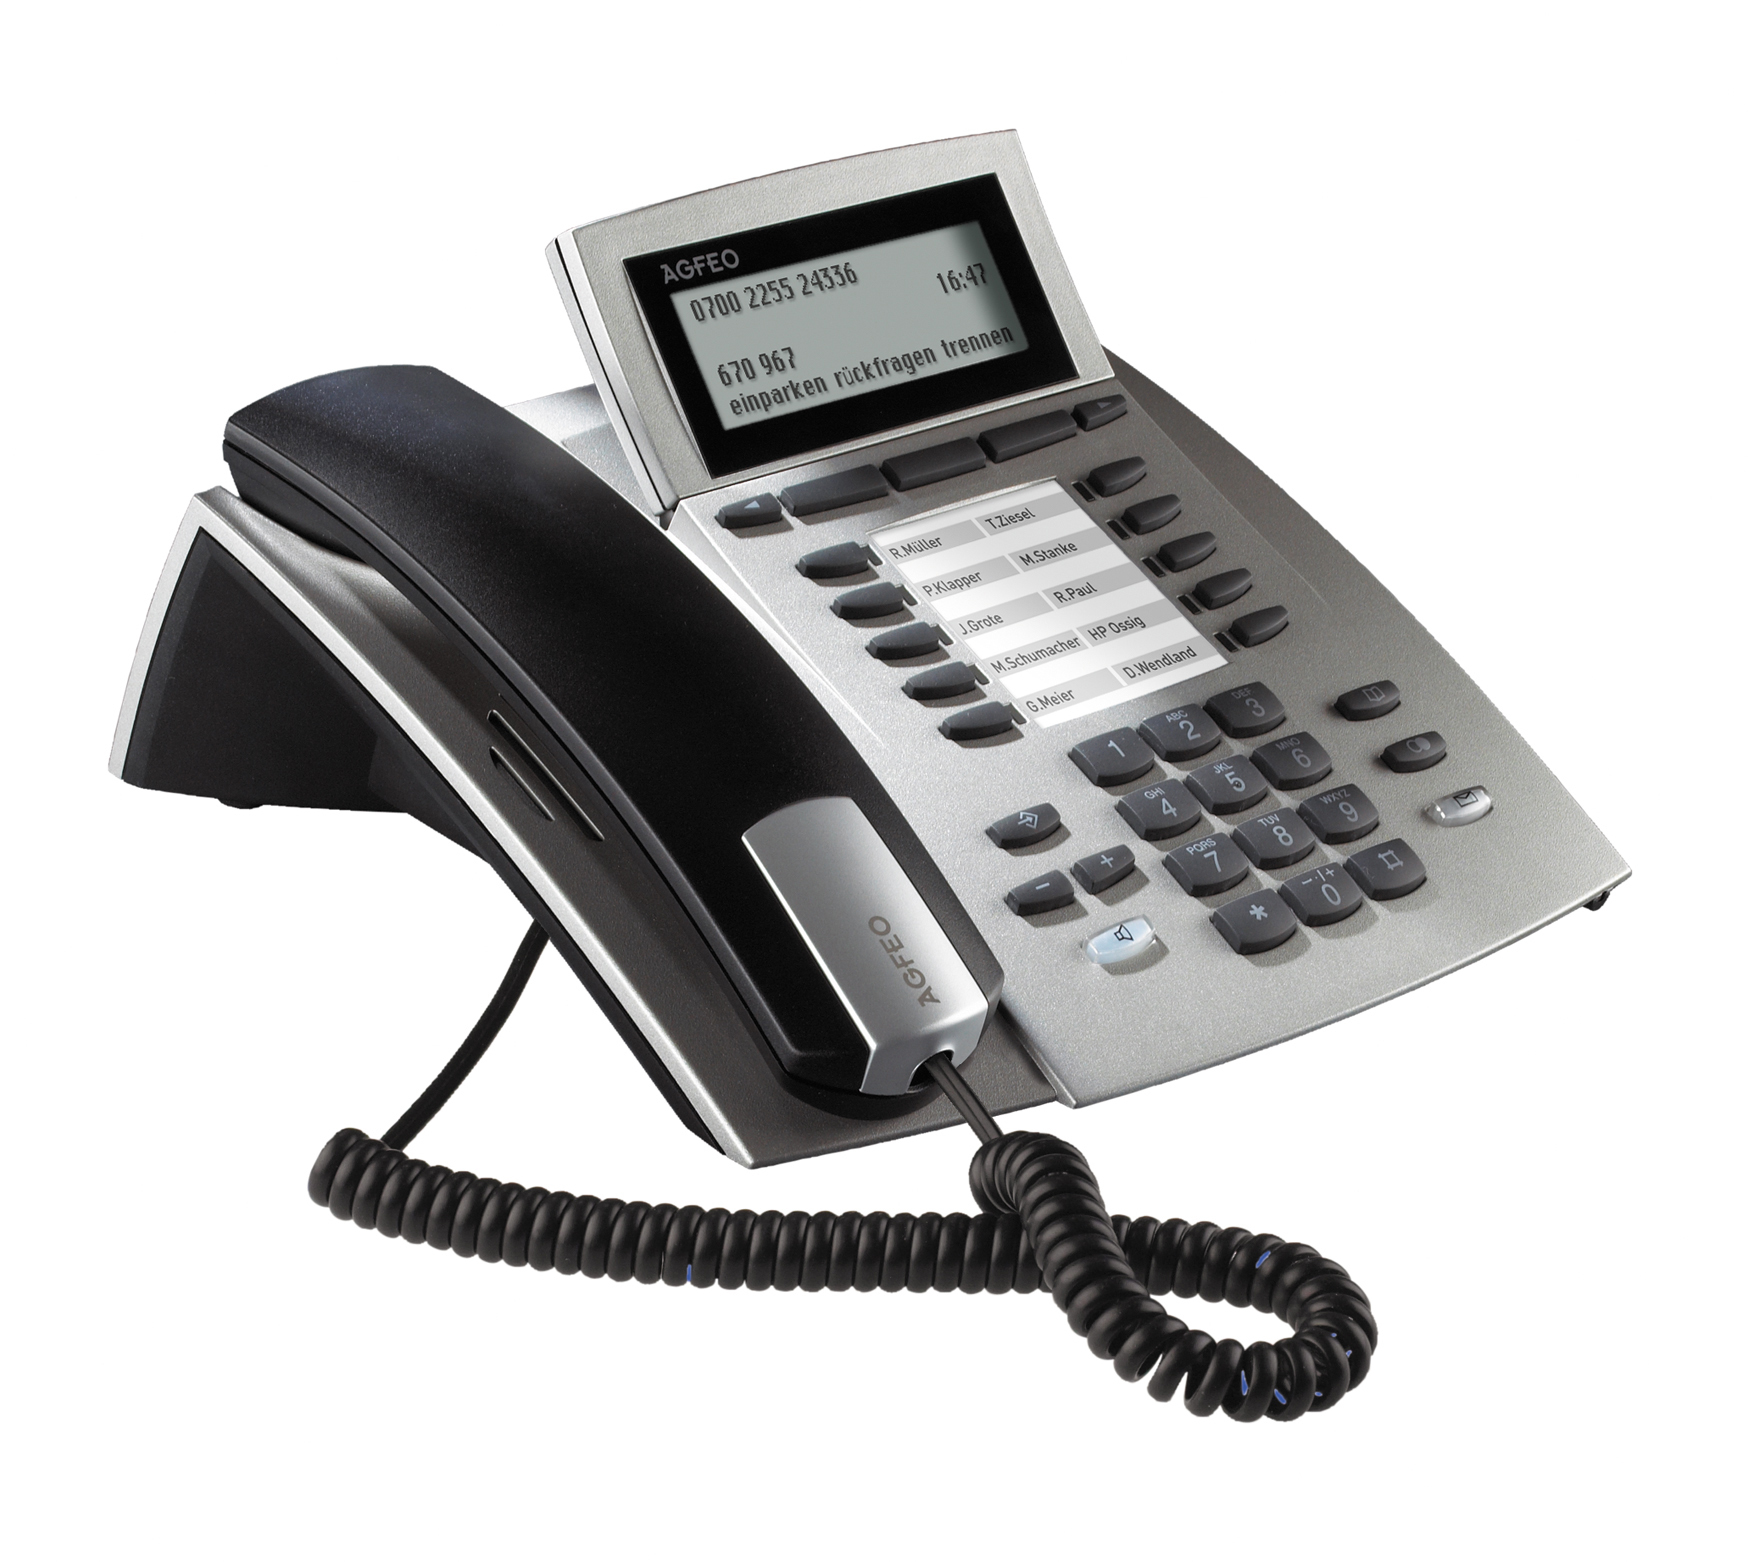 6101321 AGFEO ST 42 IP - IP Phone - Silver - Wired handset - Desk/Wall - 1000 entries - 210 mm